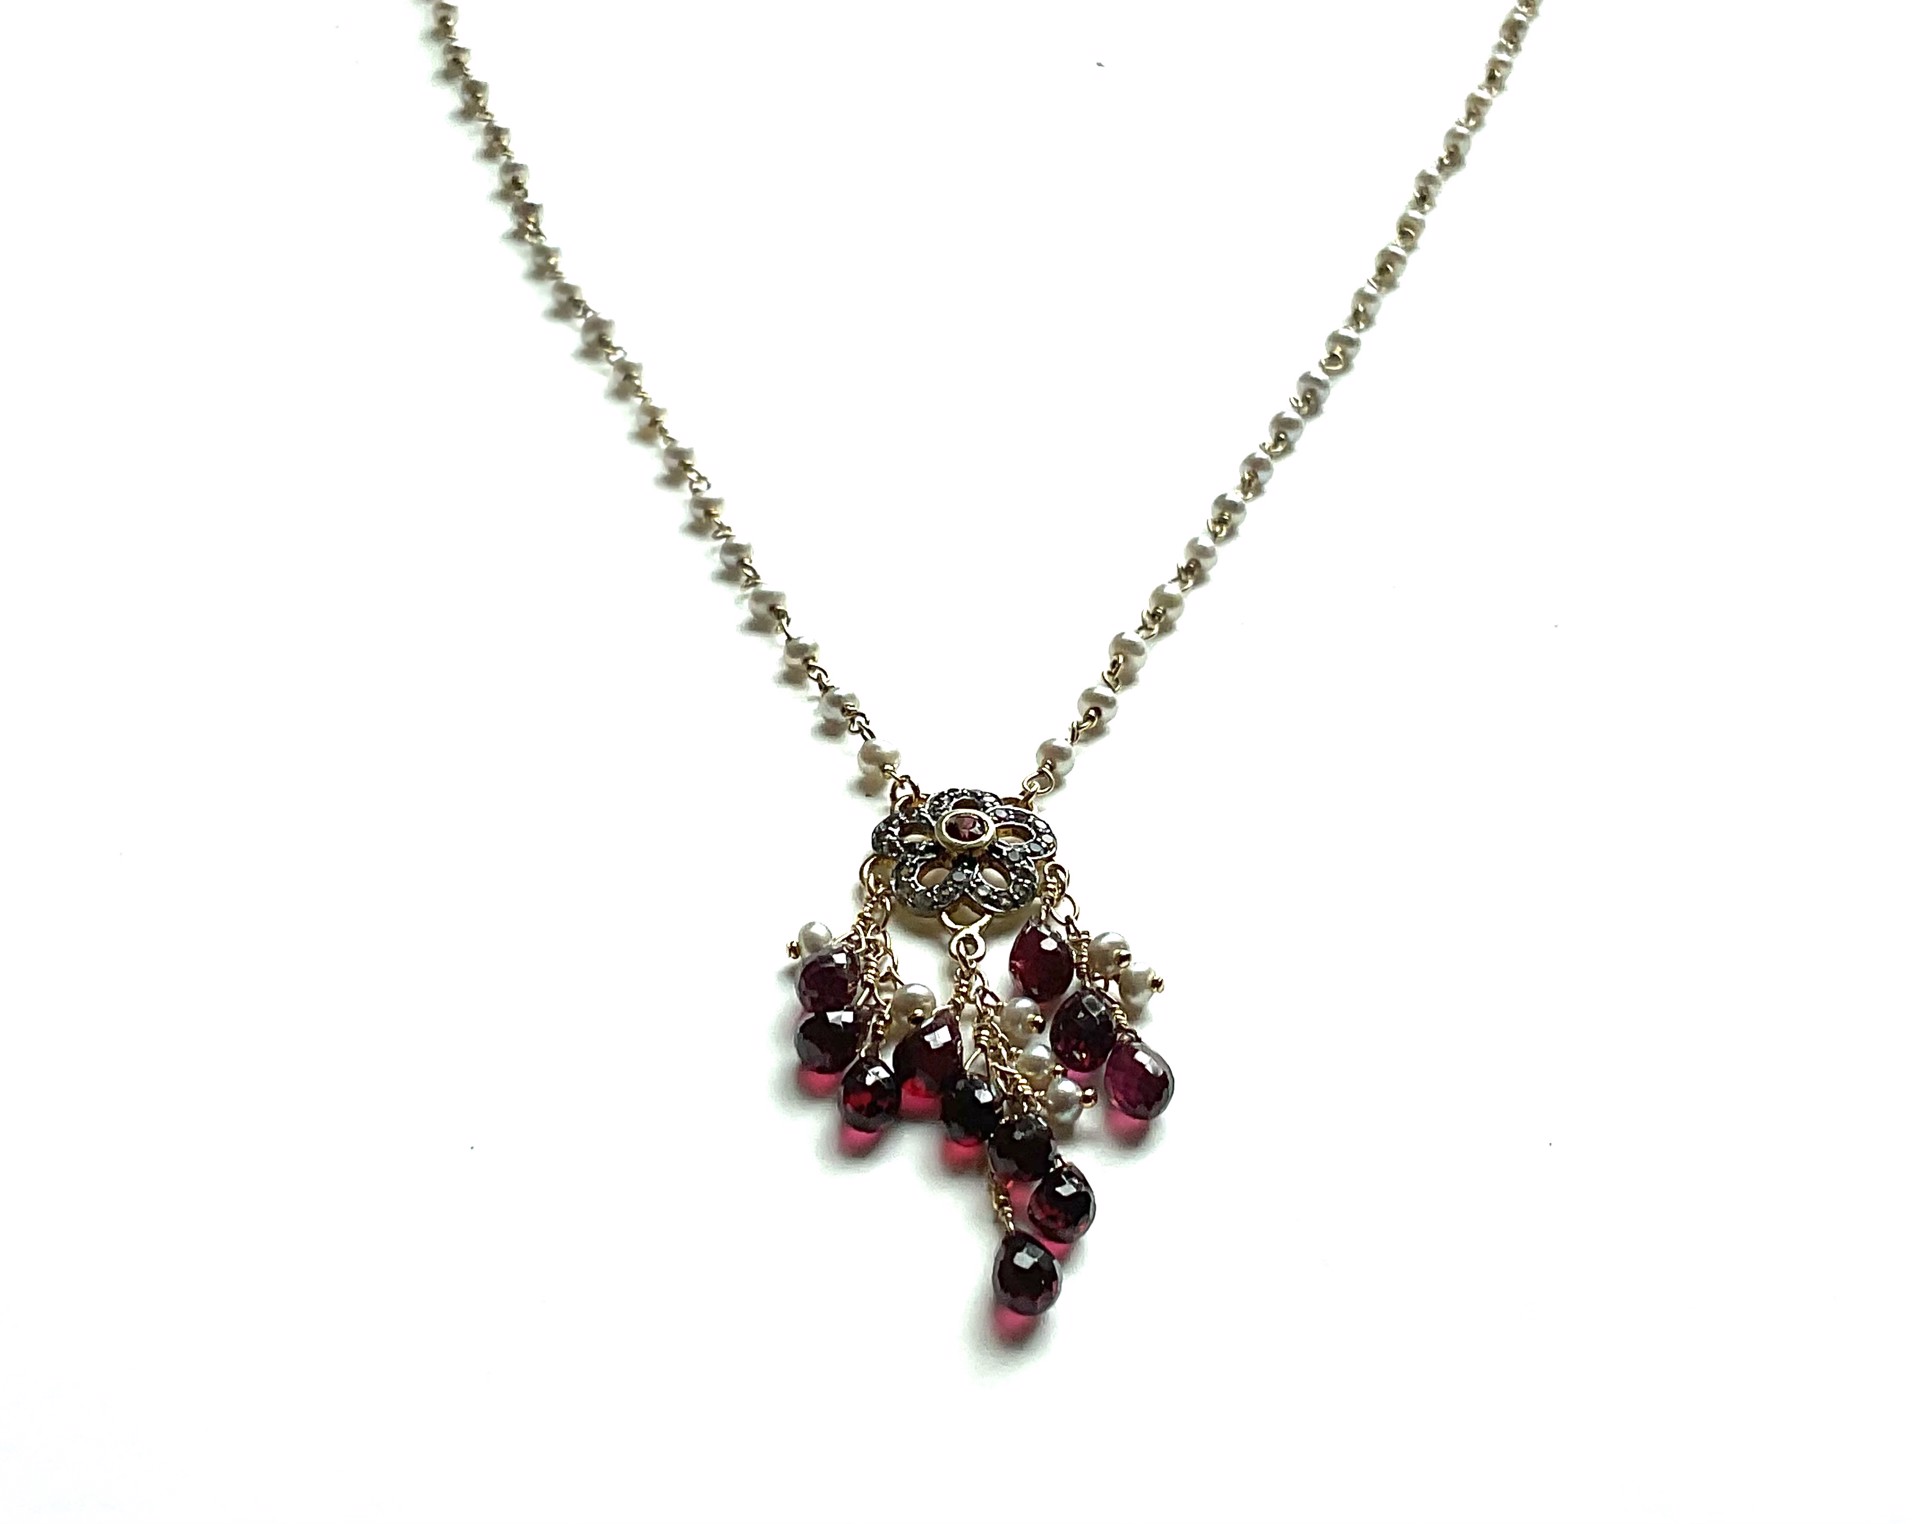 A8527E White Topaz, Garnet and Pearl Pendant on Pearl Chain by Melinda Lawton Jewelry